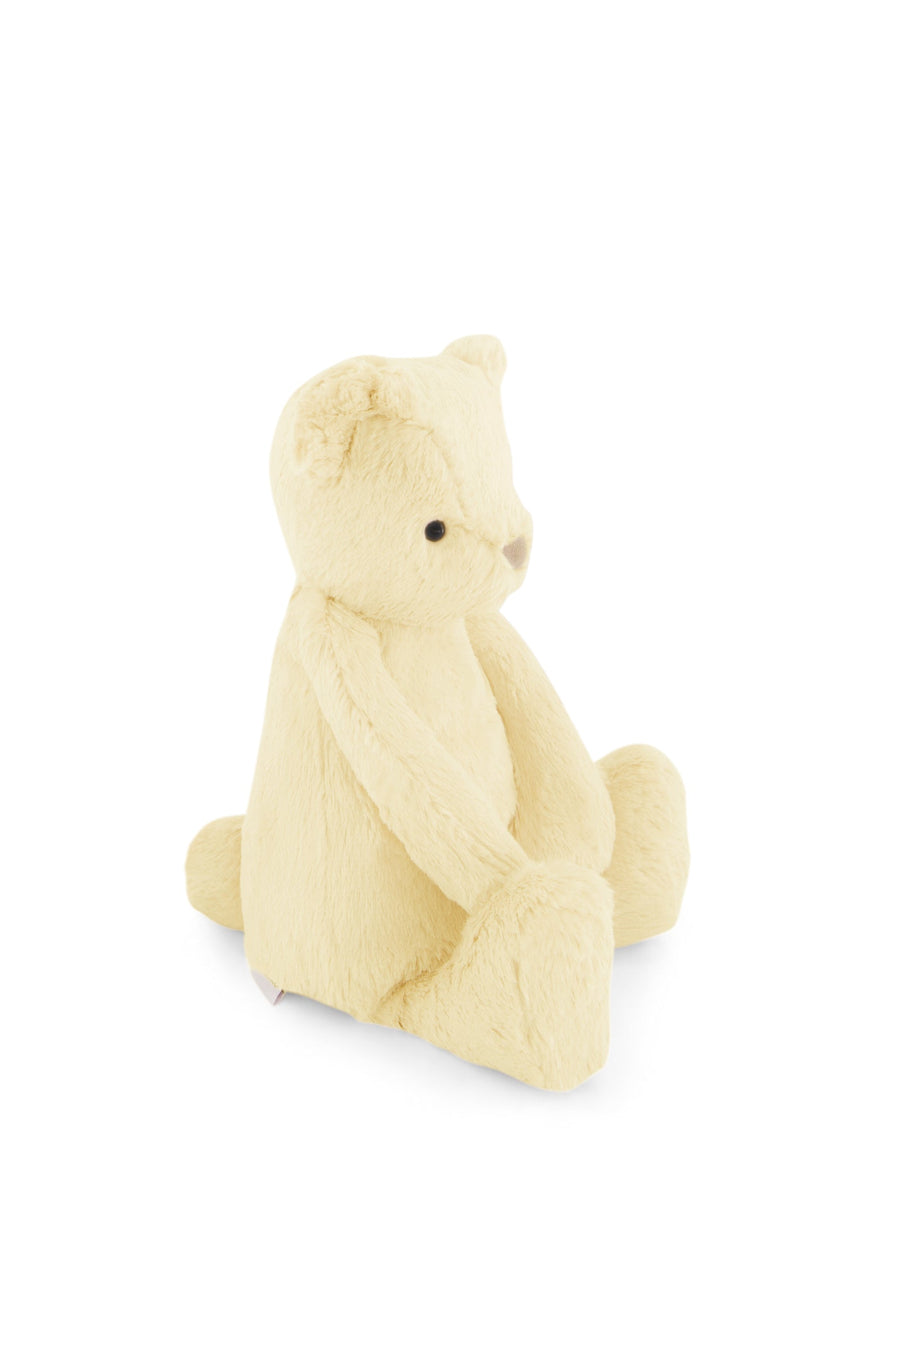 Snuggle Bunnies - George the Bear - Anise Childrens Toy from Jamie Kay USA